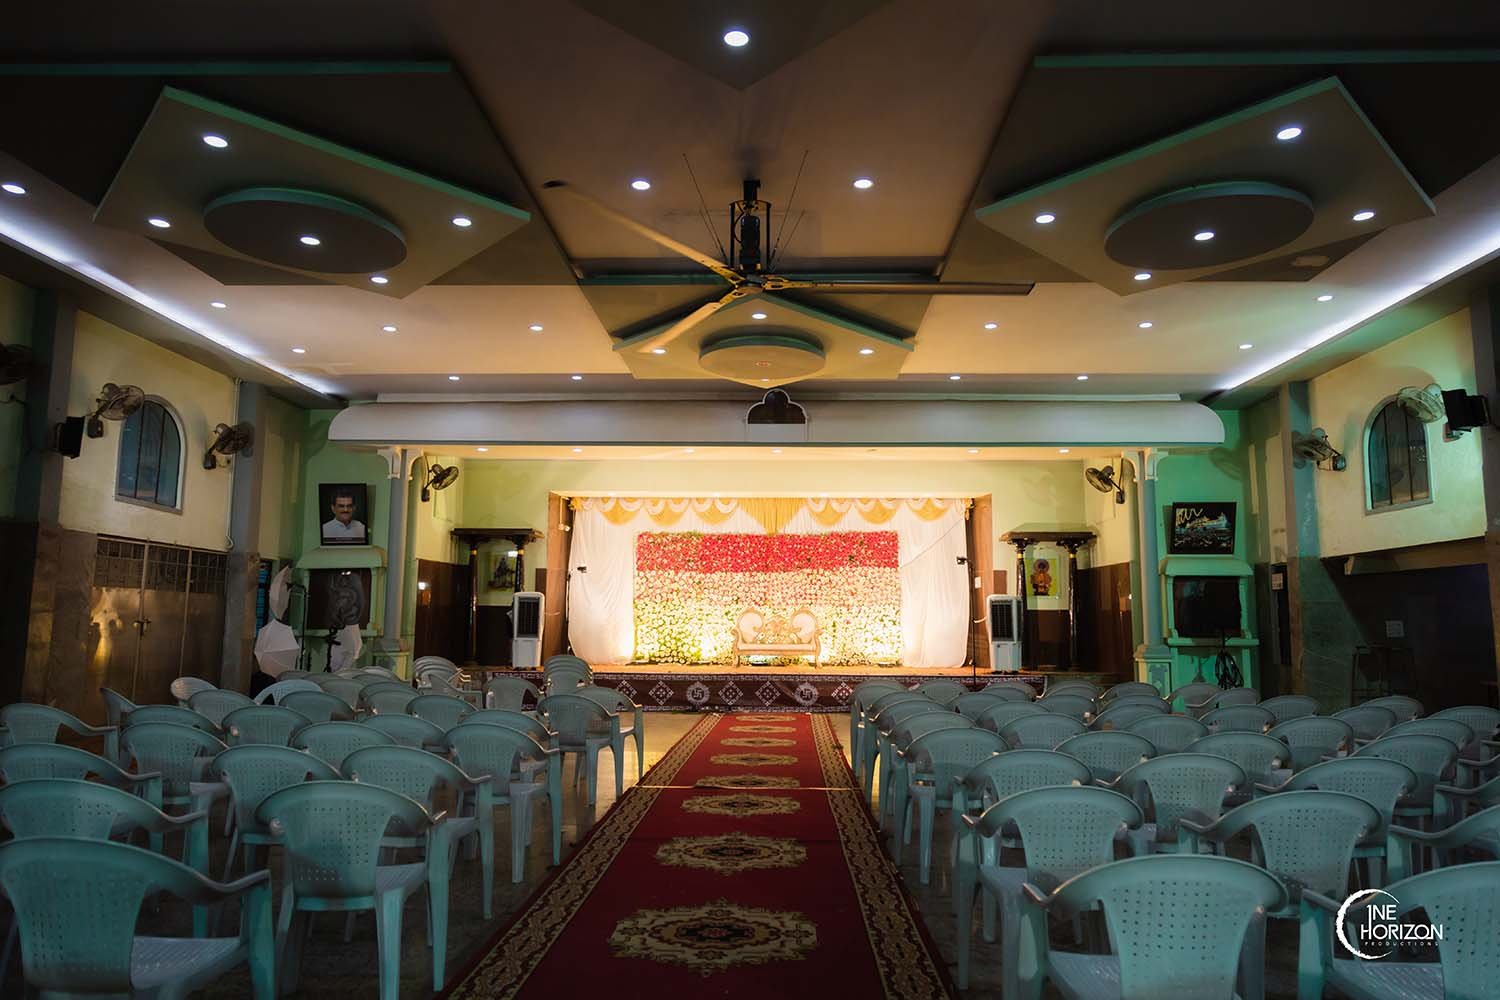 Banquet hall decorated for wedding reception